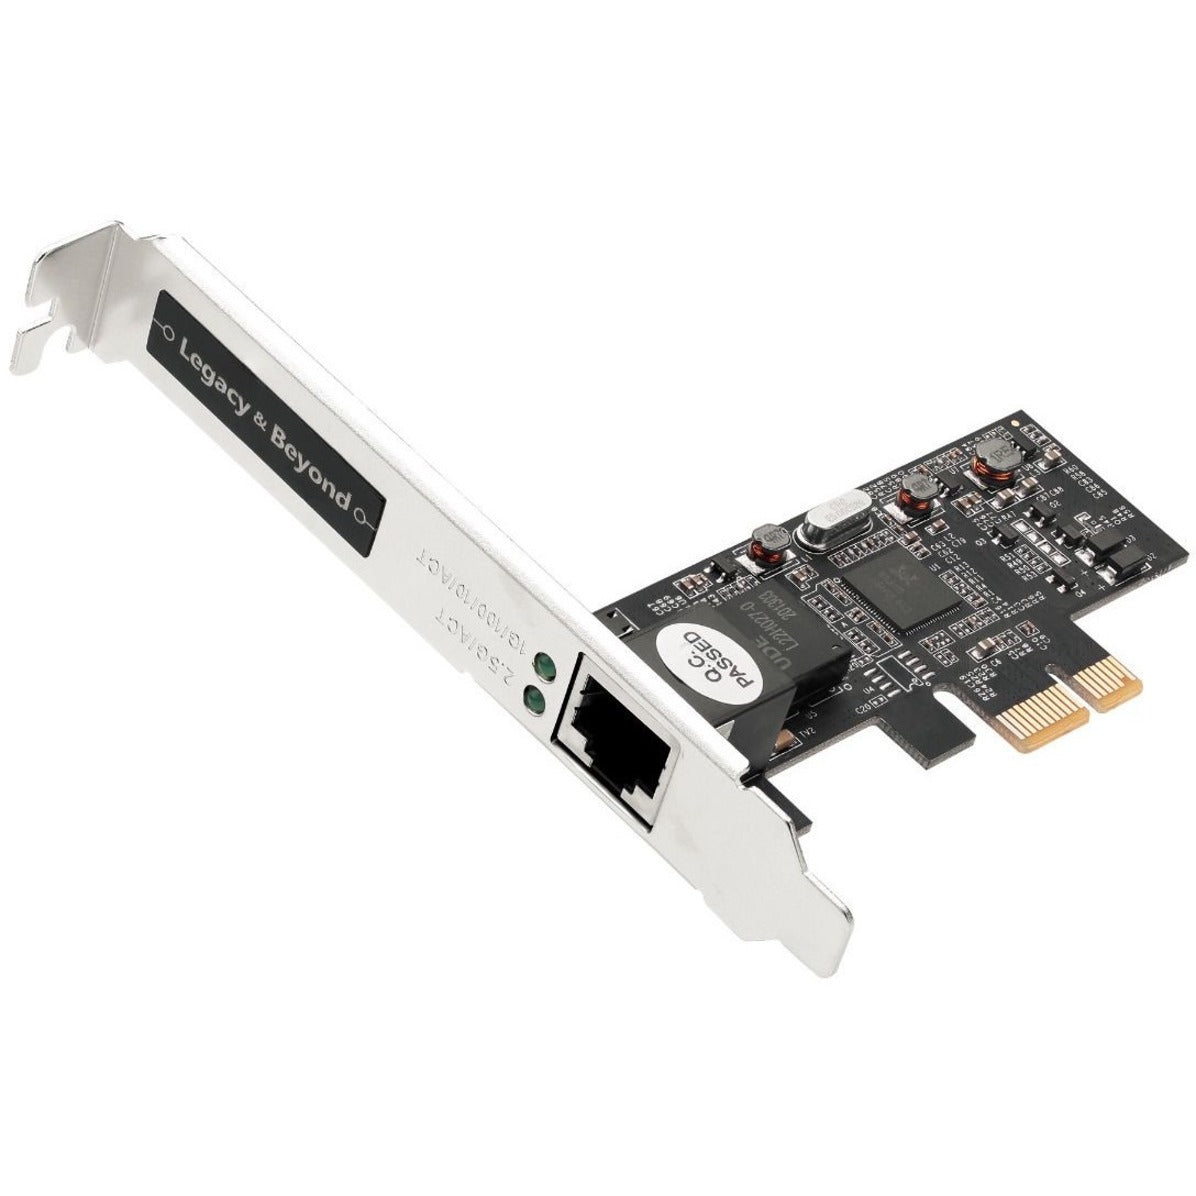 SIIG LB-GE0611-S1 Single 2.5G 4-Speed Multi-Gigabit Ethernet PCIe Card, High-Speed Network Connectivity